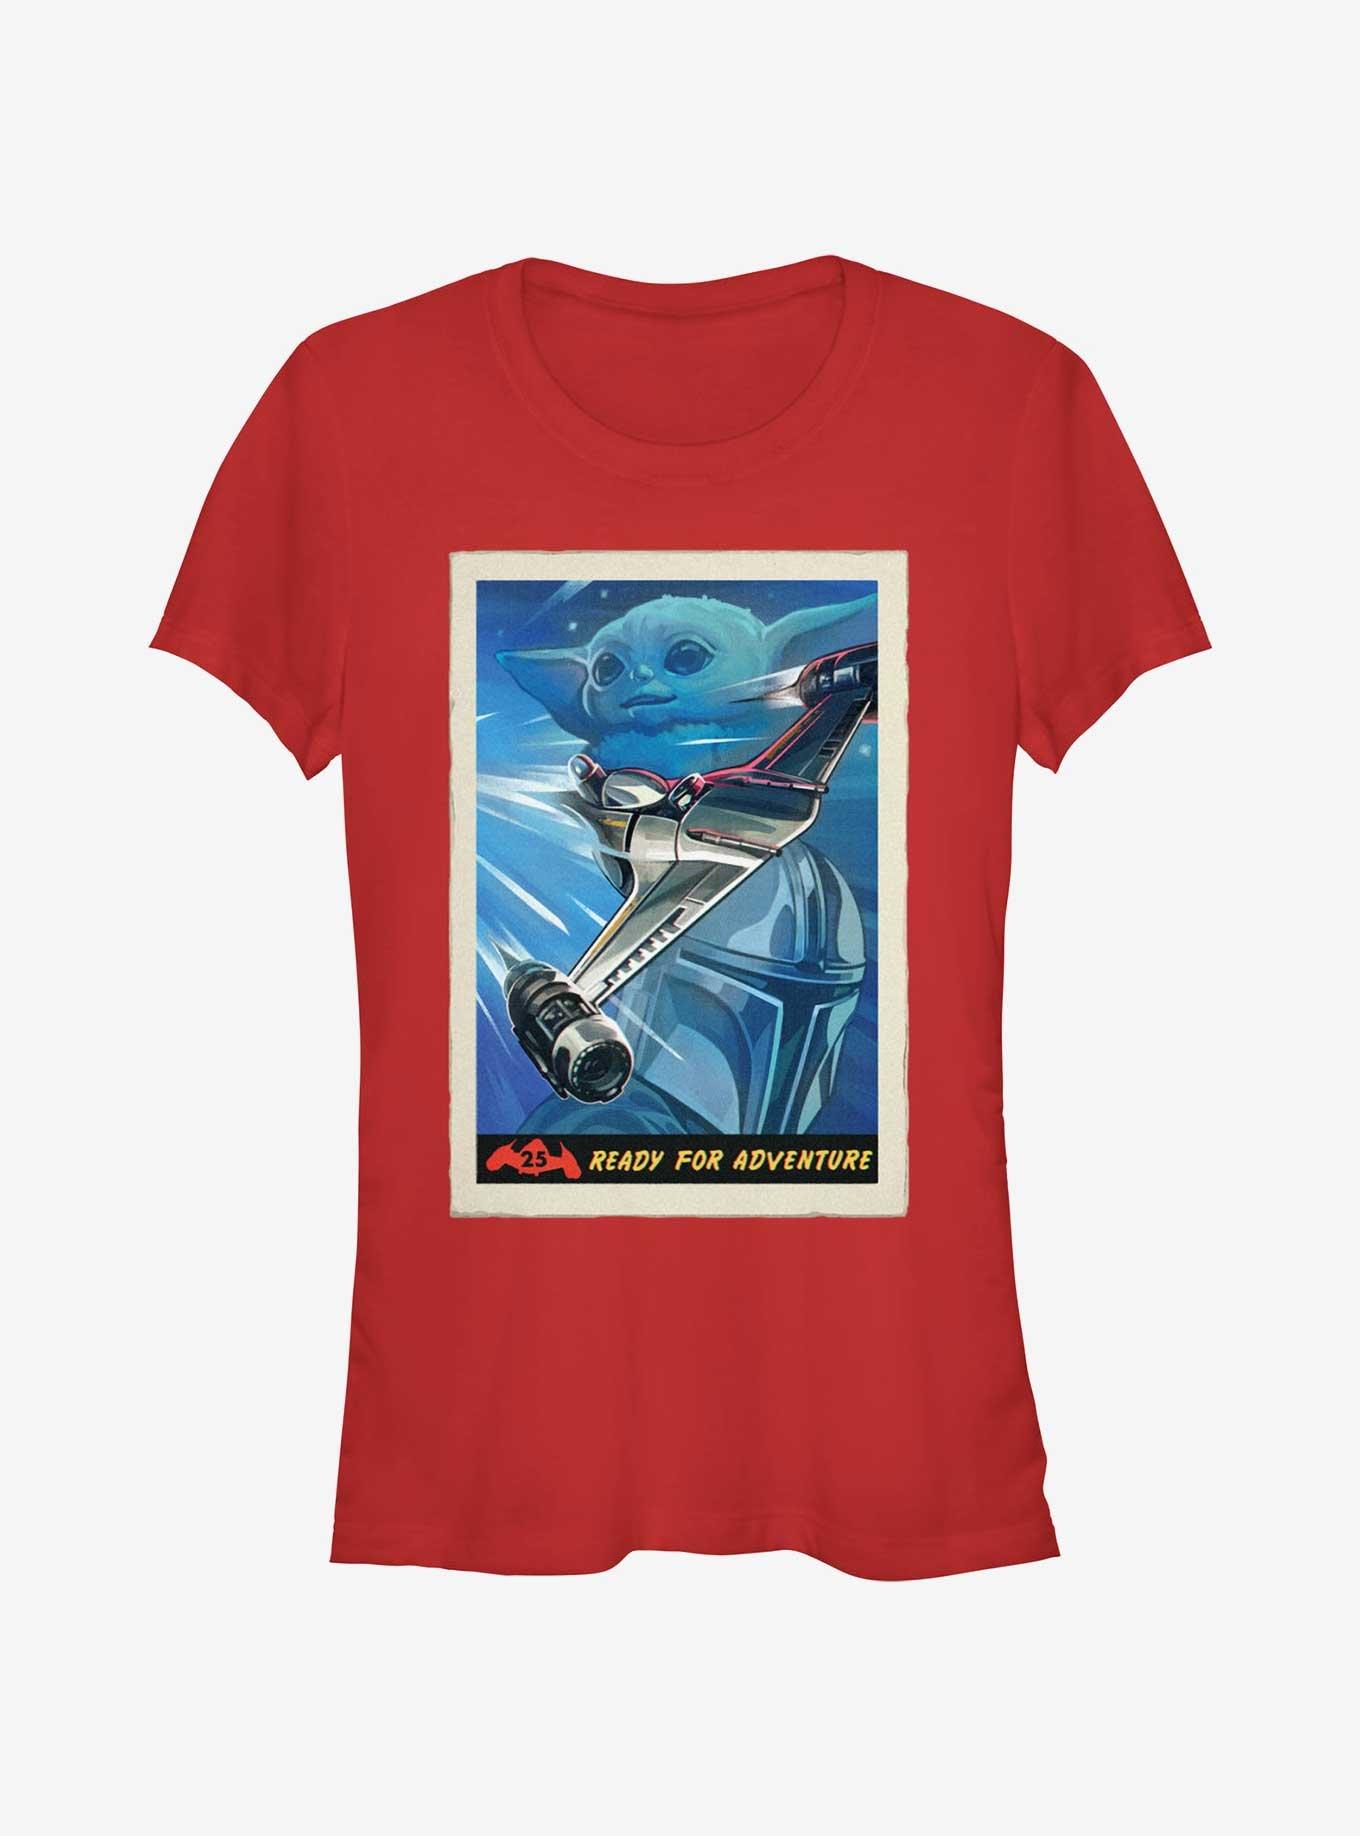 Star Wars The Mandalorian N-1 Starfighter Ready For Adventure Poster Girls T-Shirt, RED, hi-res